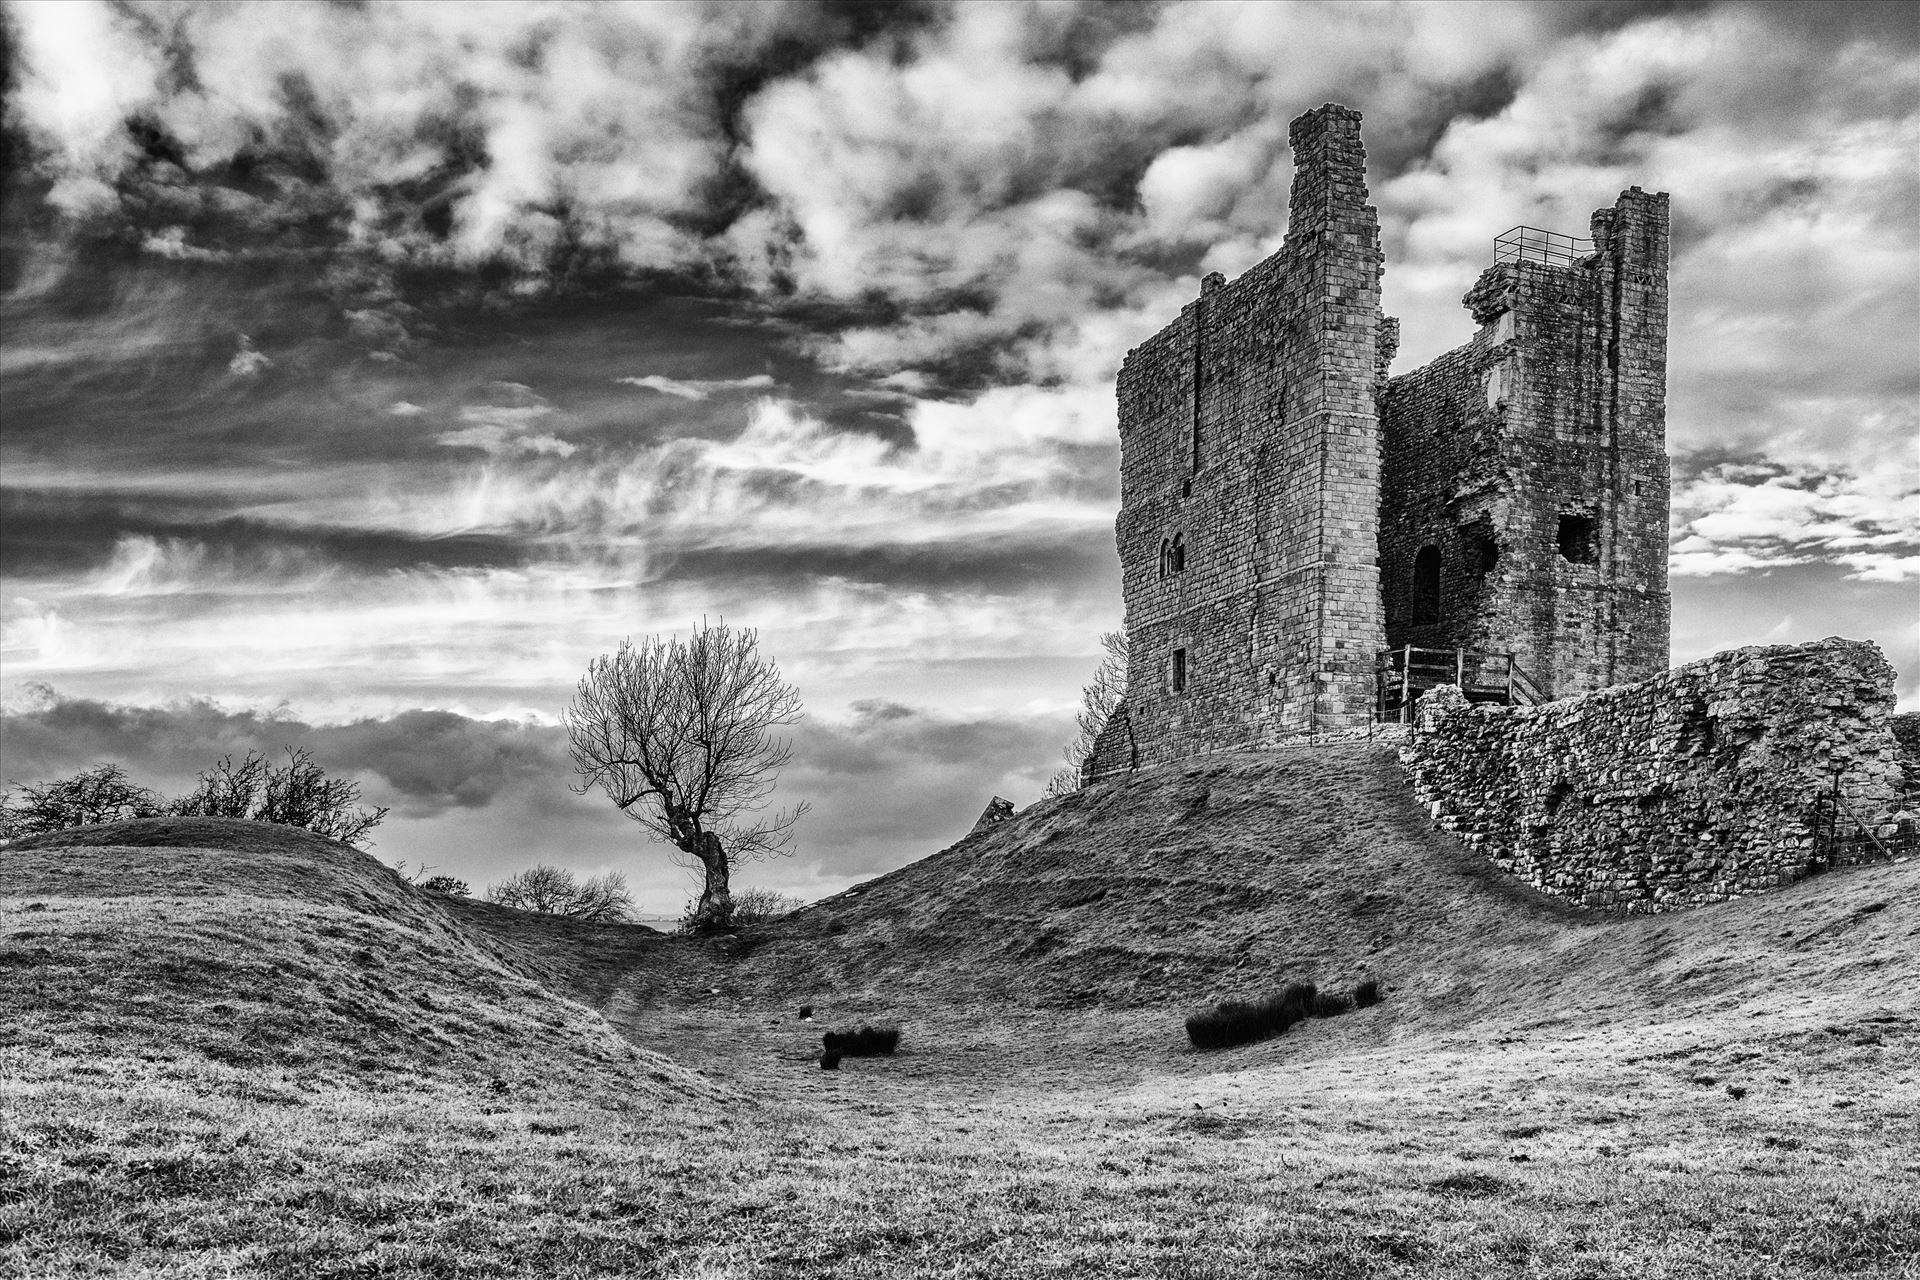 Brough Castle Brough Castle is a ruined castle in the village of Brough, Cumbria, England. The castle was built by William Rufus around 1092 within the old Roman fort of Verterae to protect a key route through the Pennine Mountains. by philreay